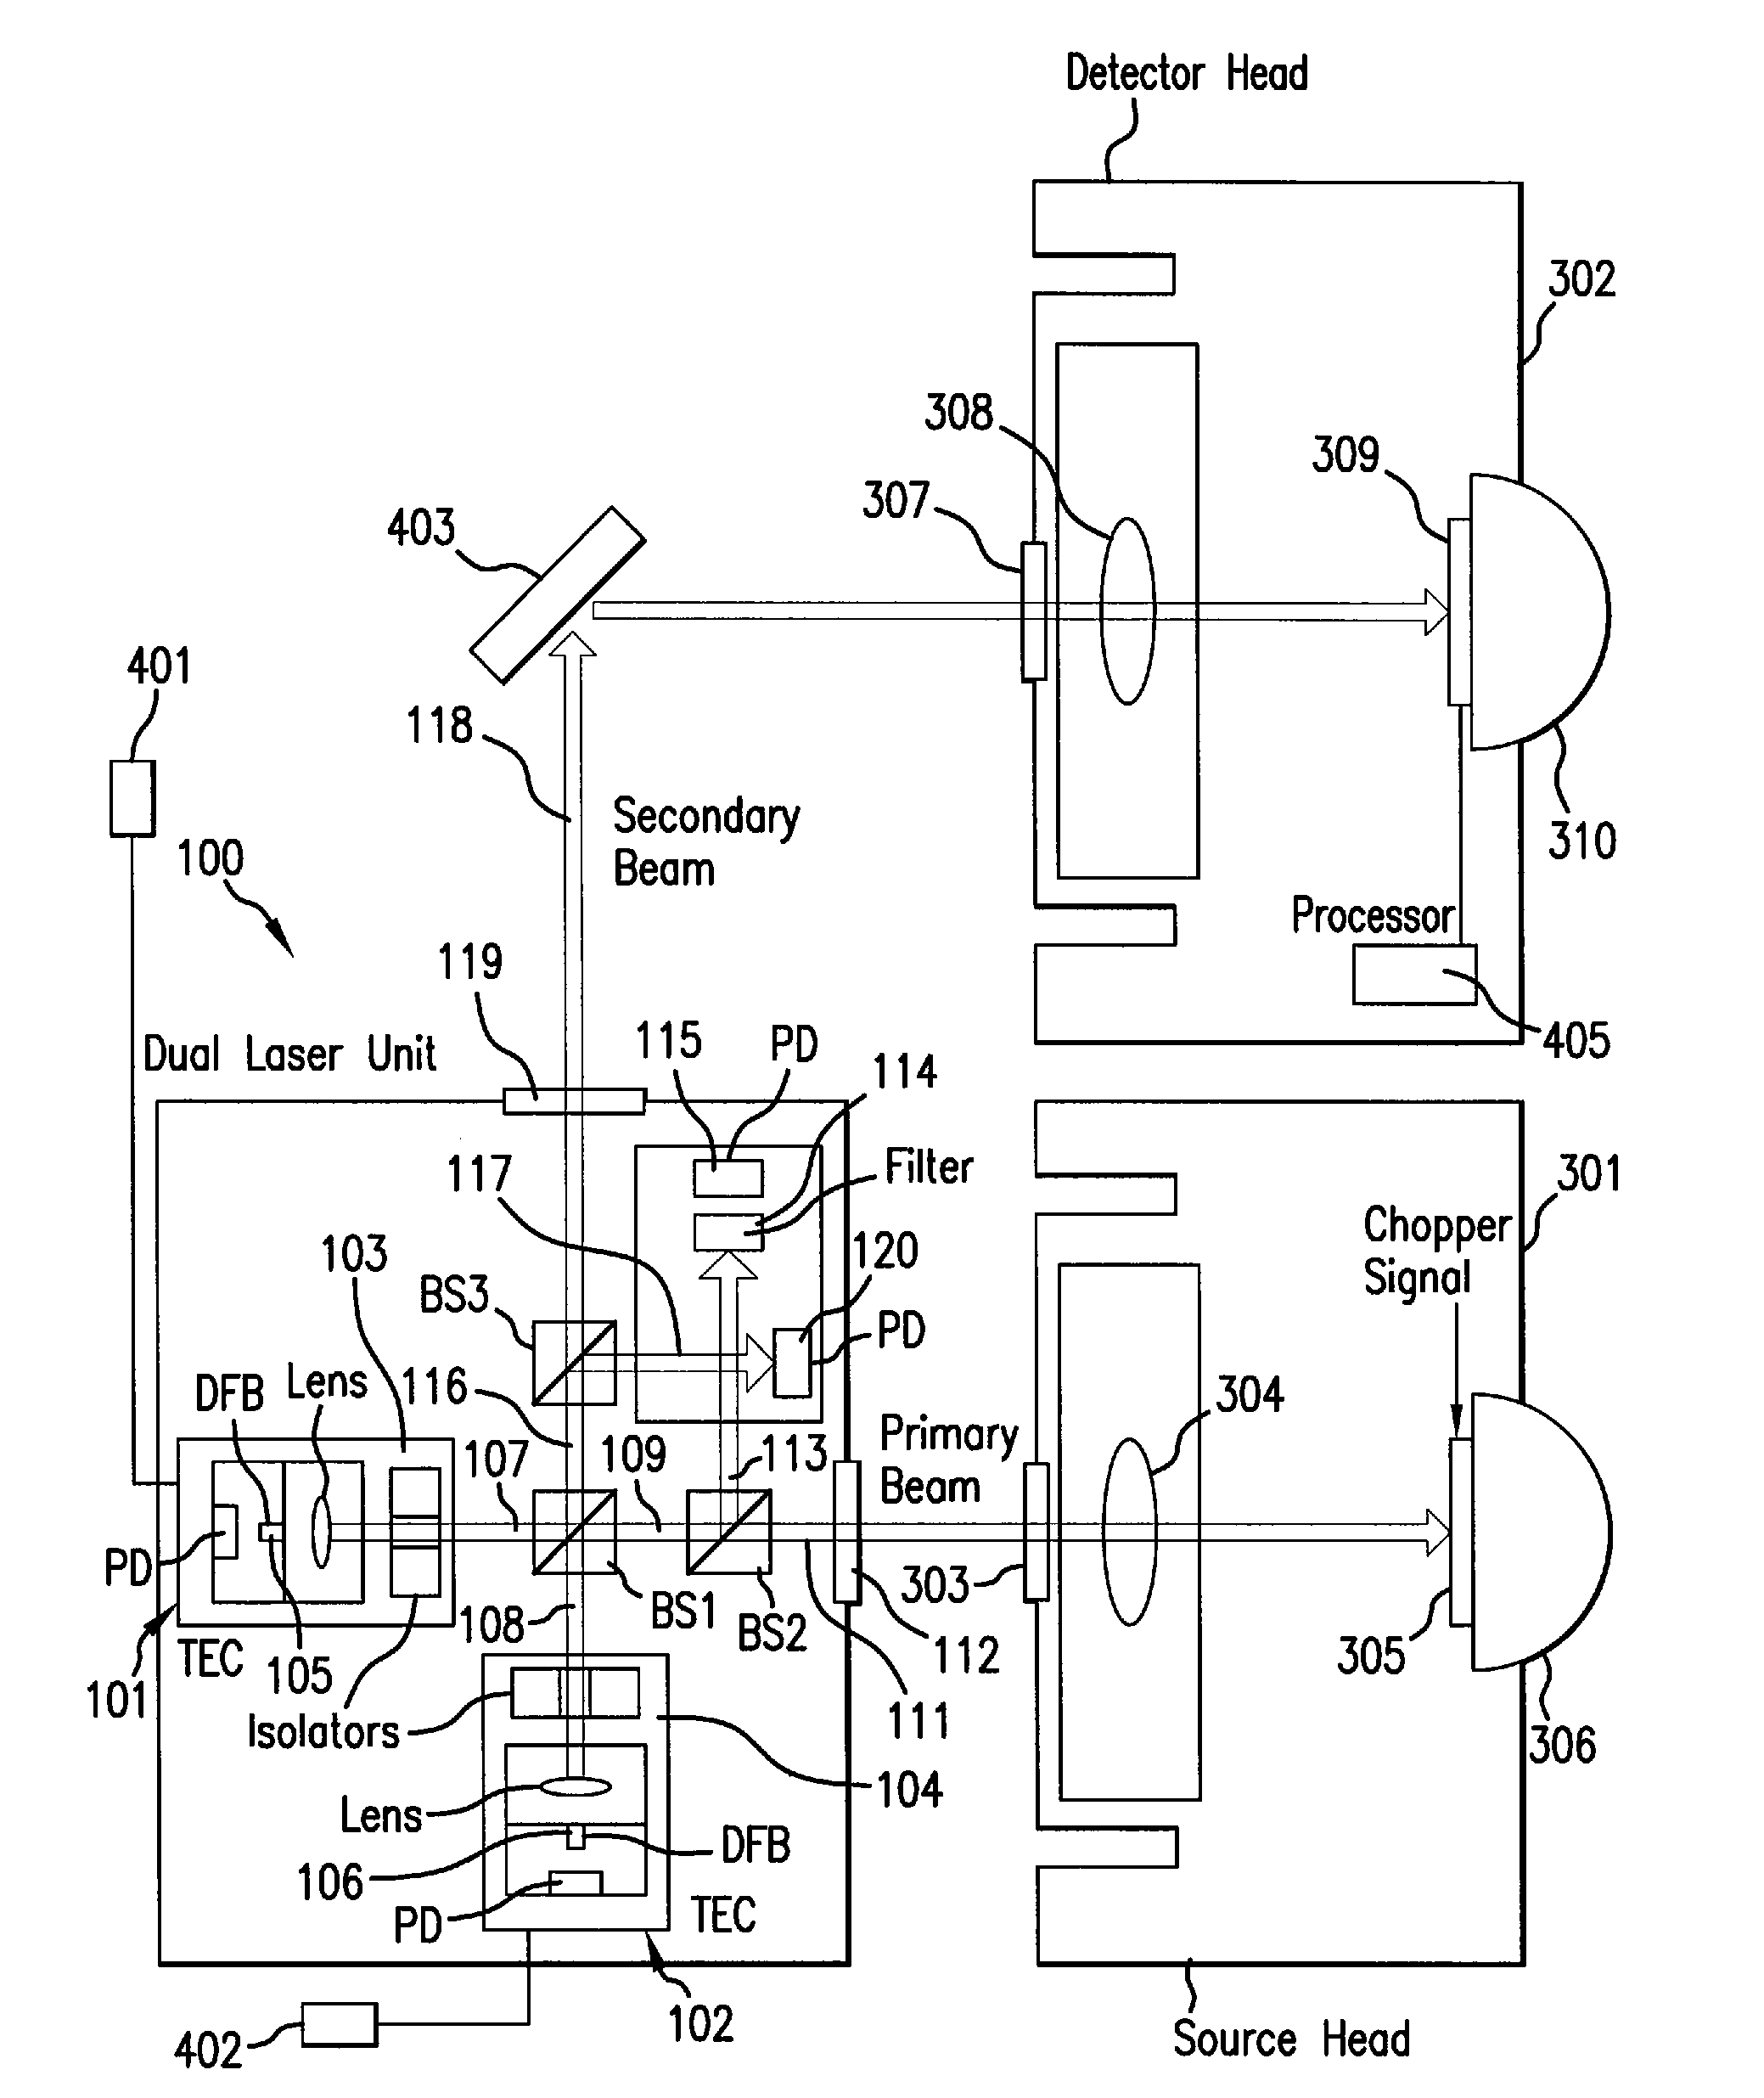 Terahertz Frequency Domain Spectrometer with Controllable Phase Shift